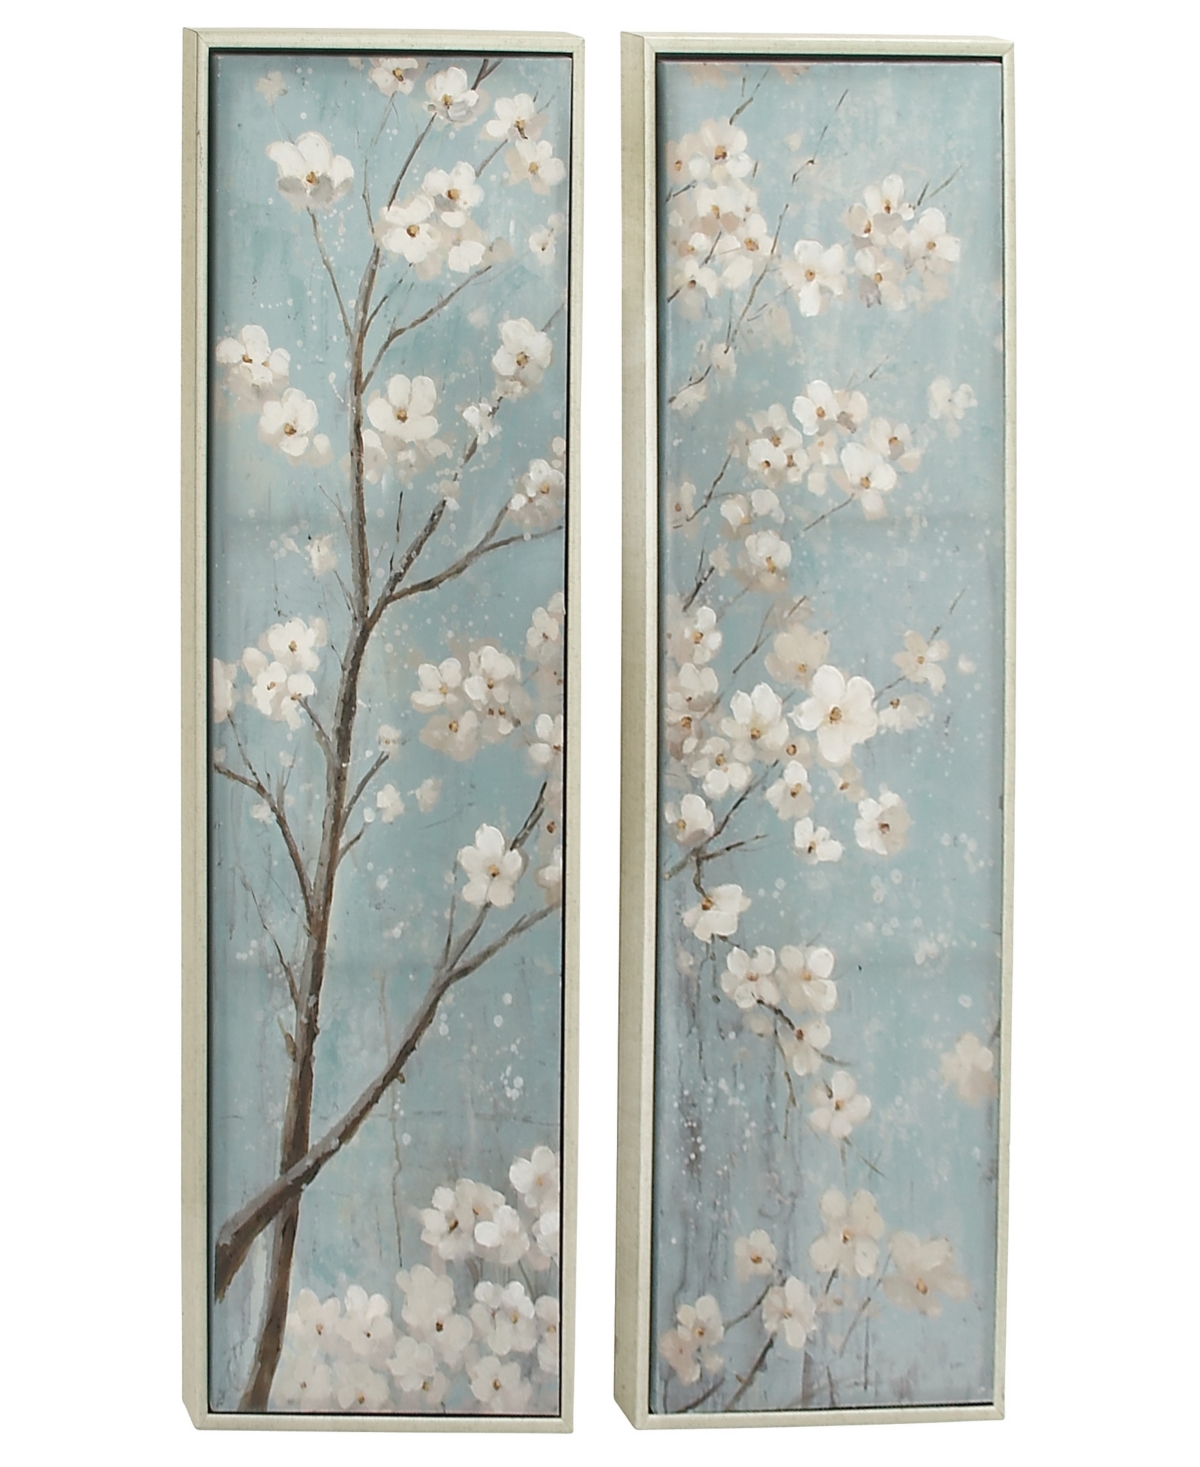 Rosemary Lane Canvas Cherry Blossom Floral Framed Wall Art With Silver-tone Frame Set Of 2, 20" X 59" In Teal